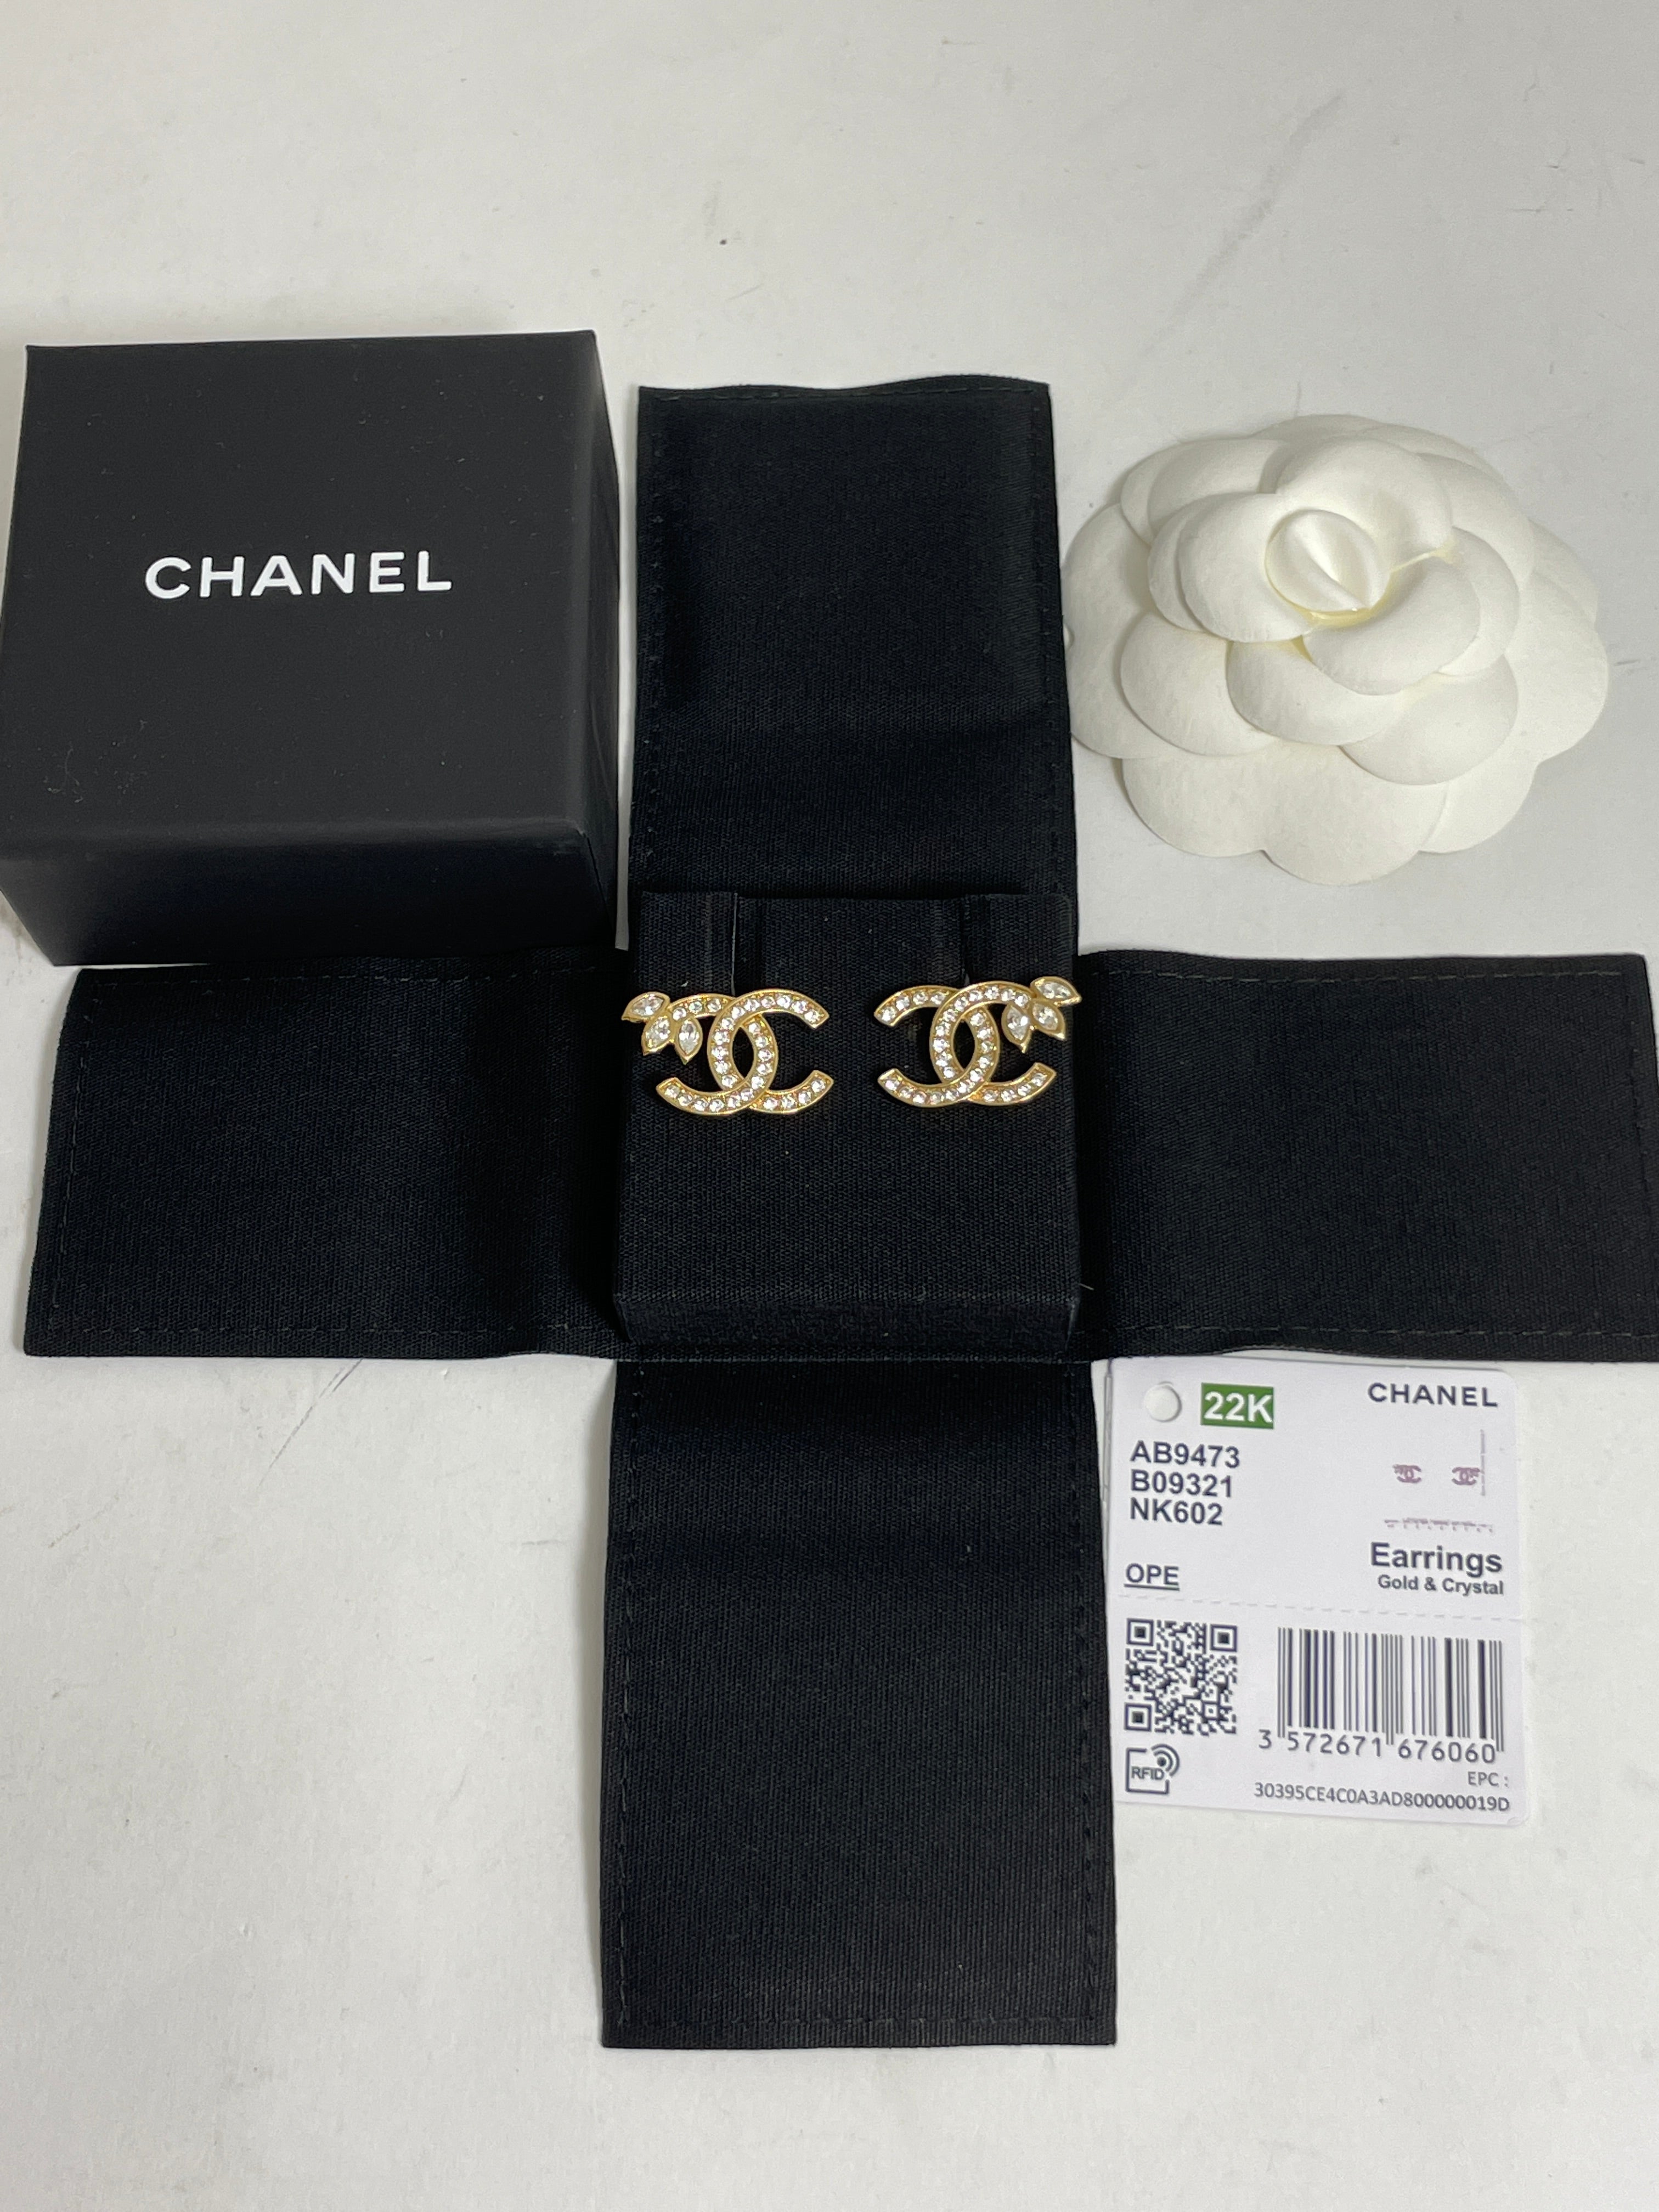 Chanel 22 CC Gold Tone Crystal Earrings Petals – The Millionaires